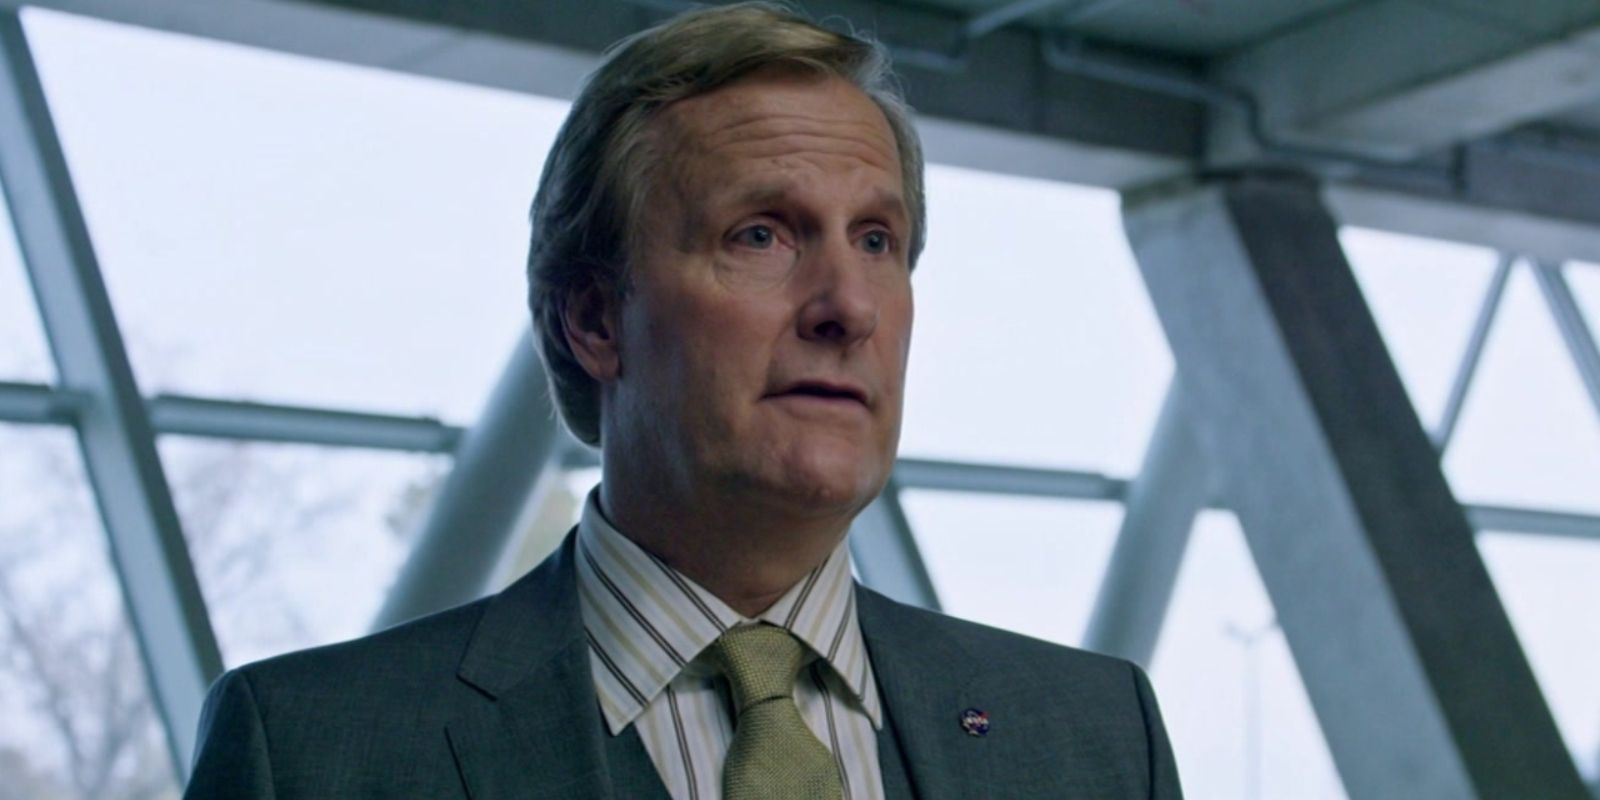 Jeff Daniels 10 Best Movies & TV Shows, Ranked